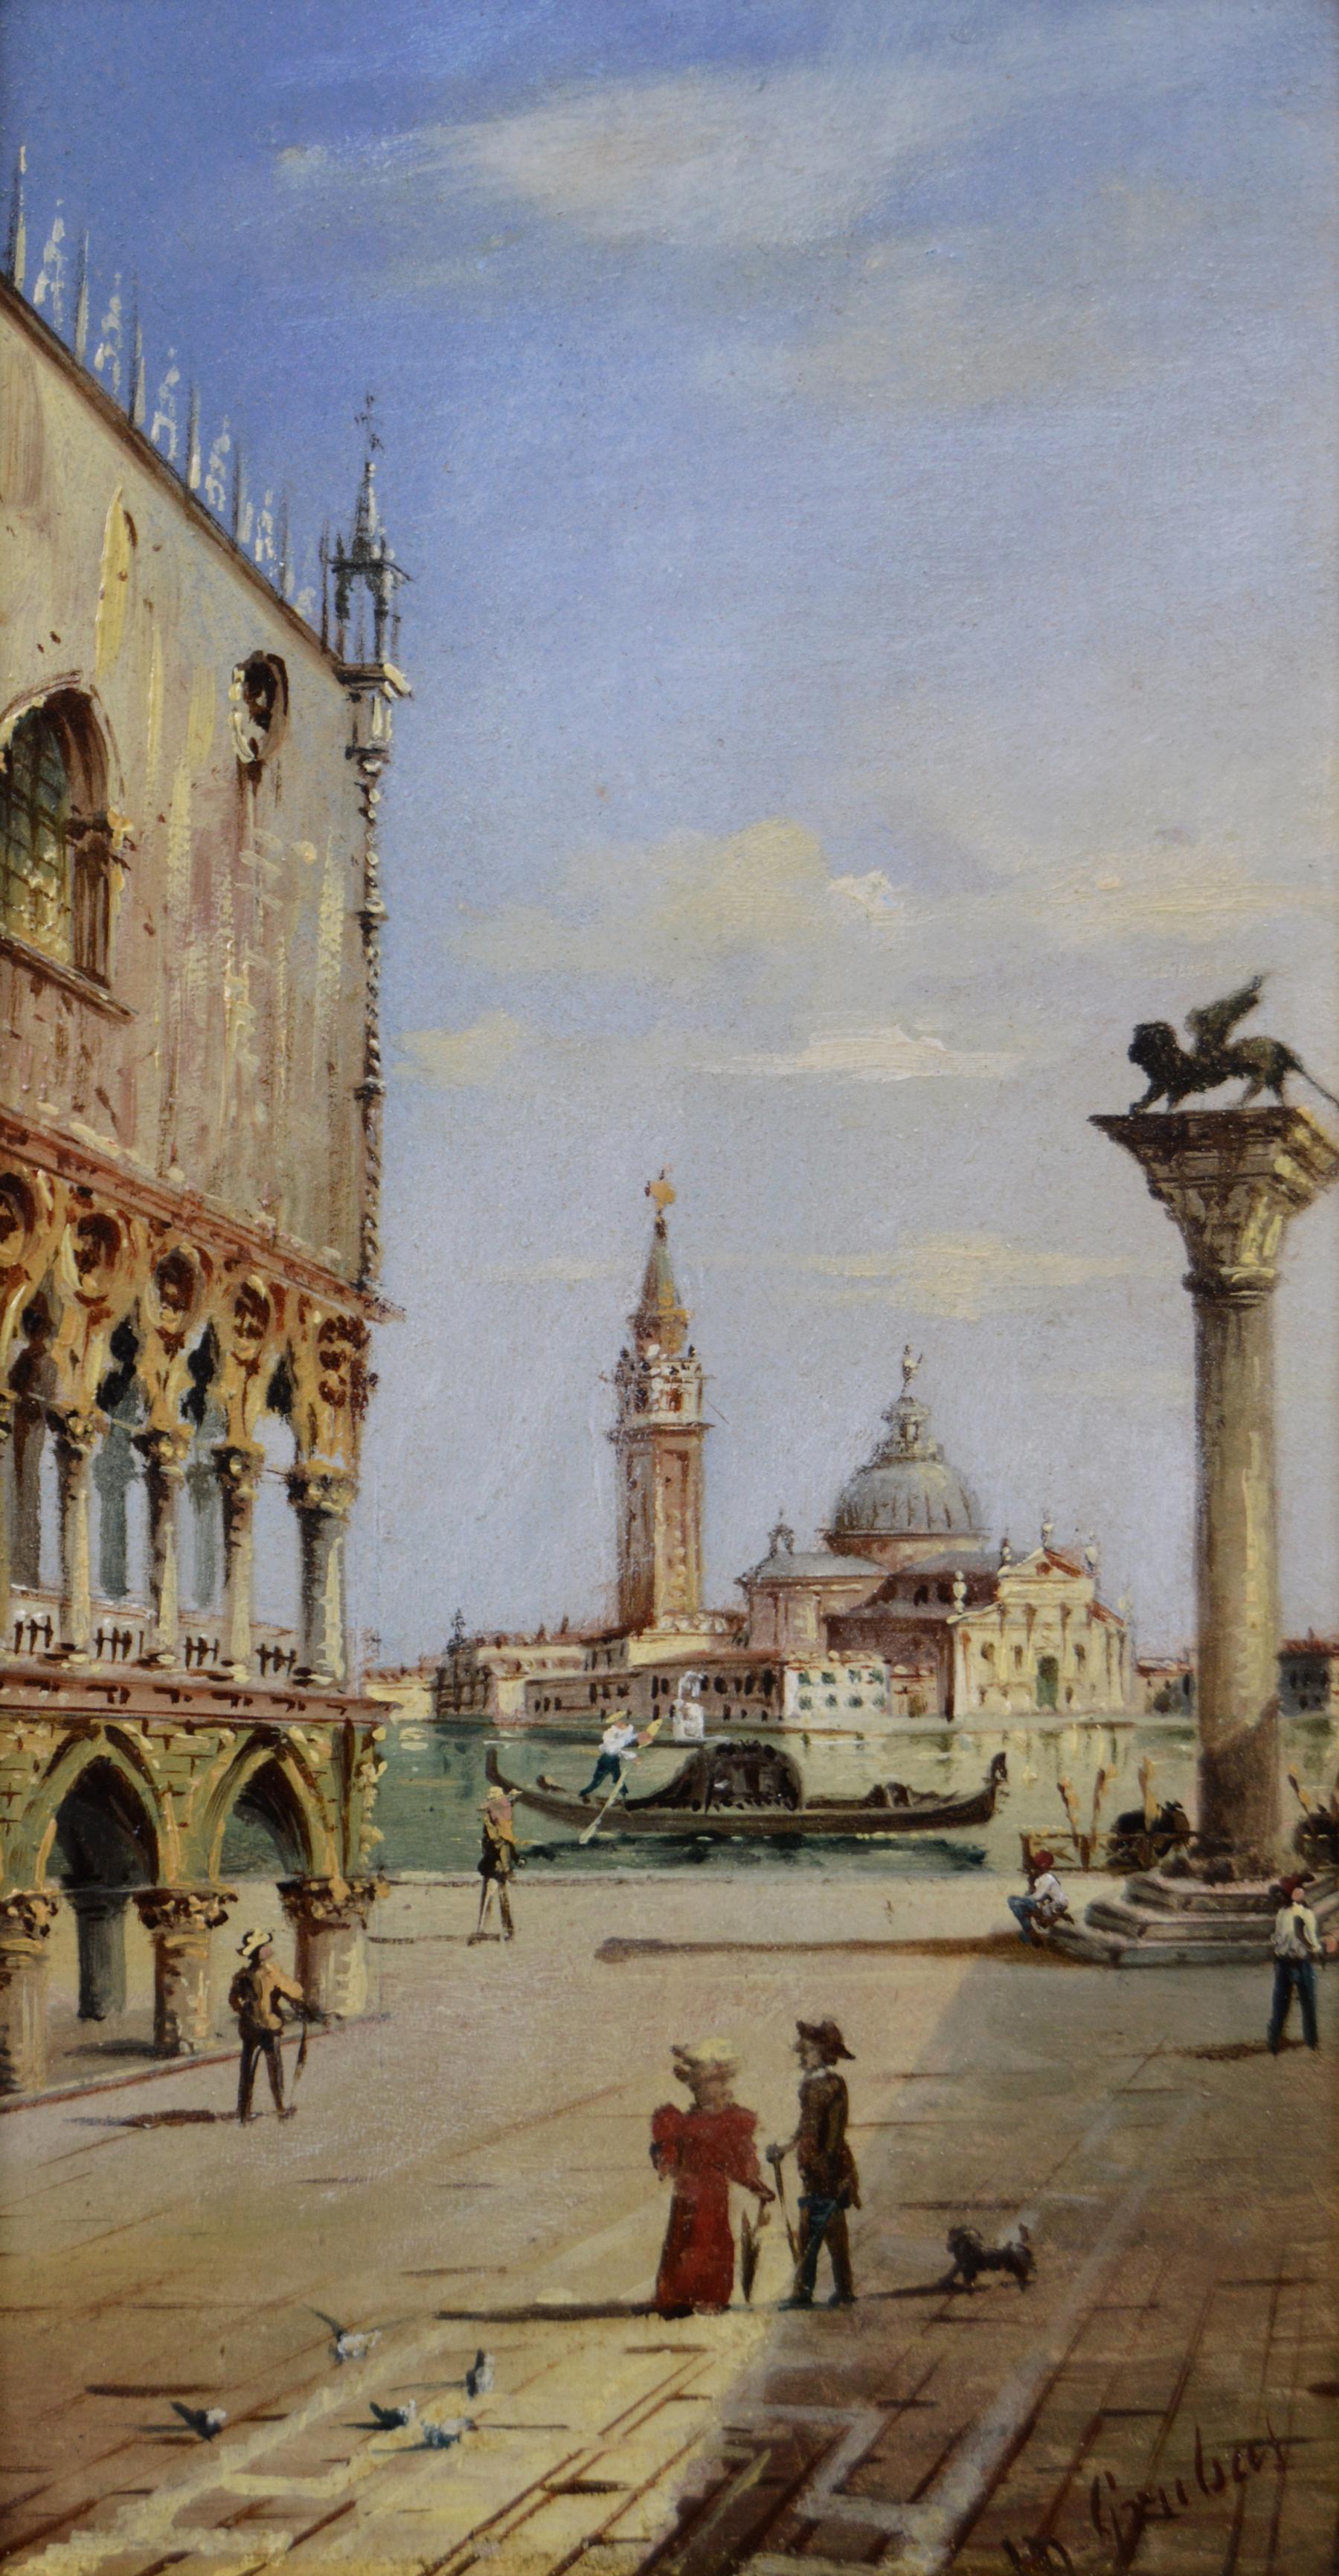 Pair of 19th Century townscape oil paintings of Venice - Brown Landscape Painting by Marco Grubacs